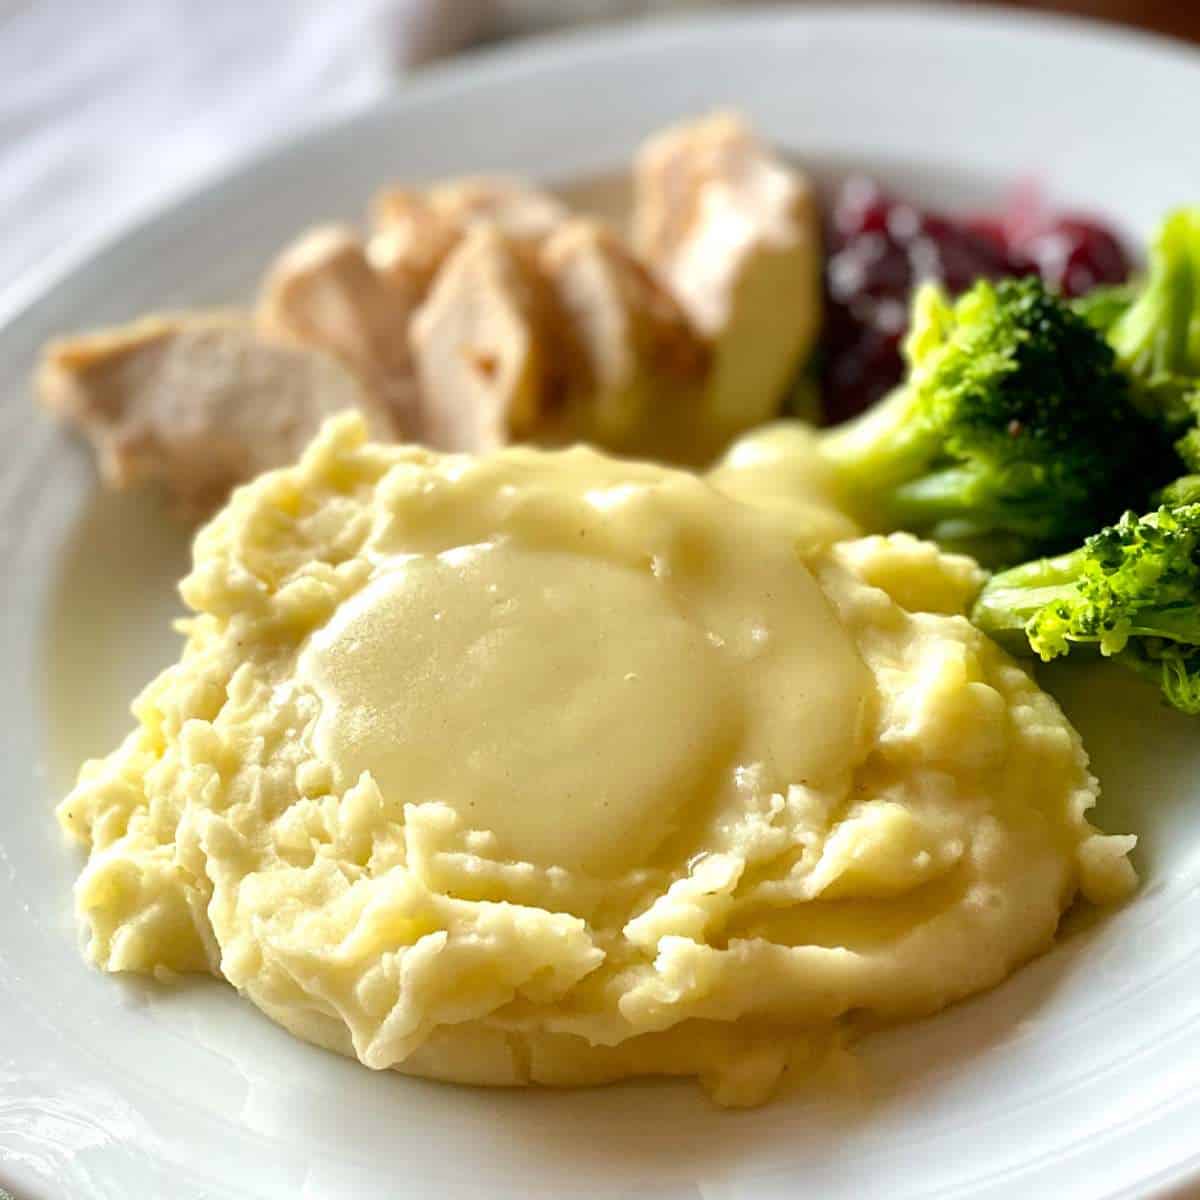 A serving of mashed potatoes topped with gluten free turkey gravy